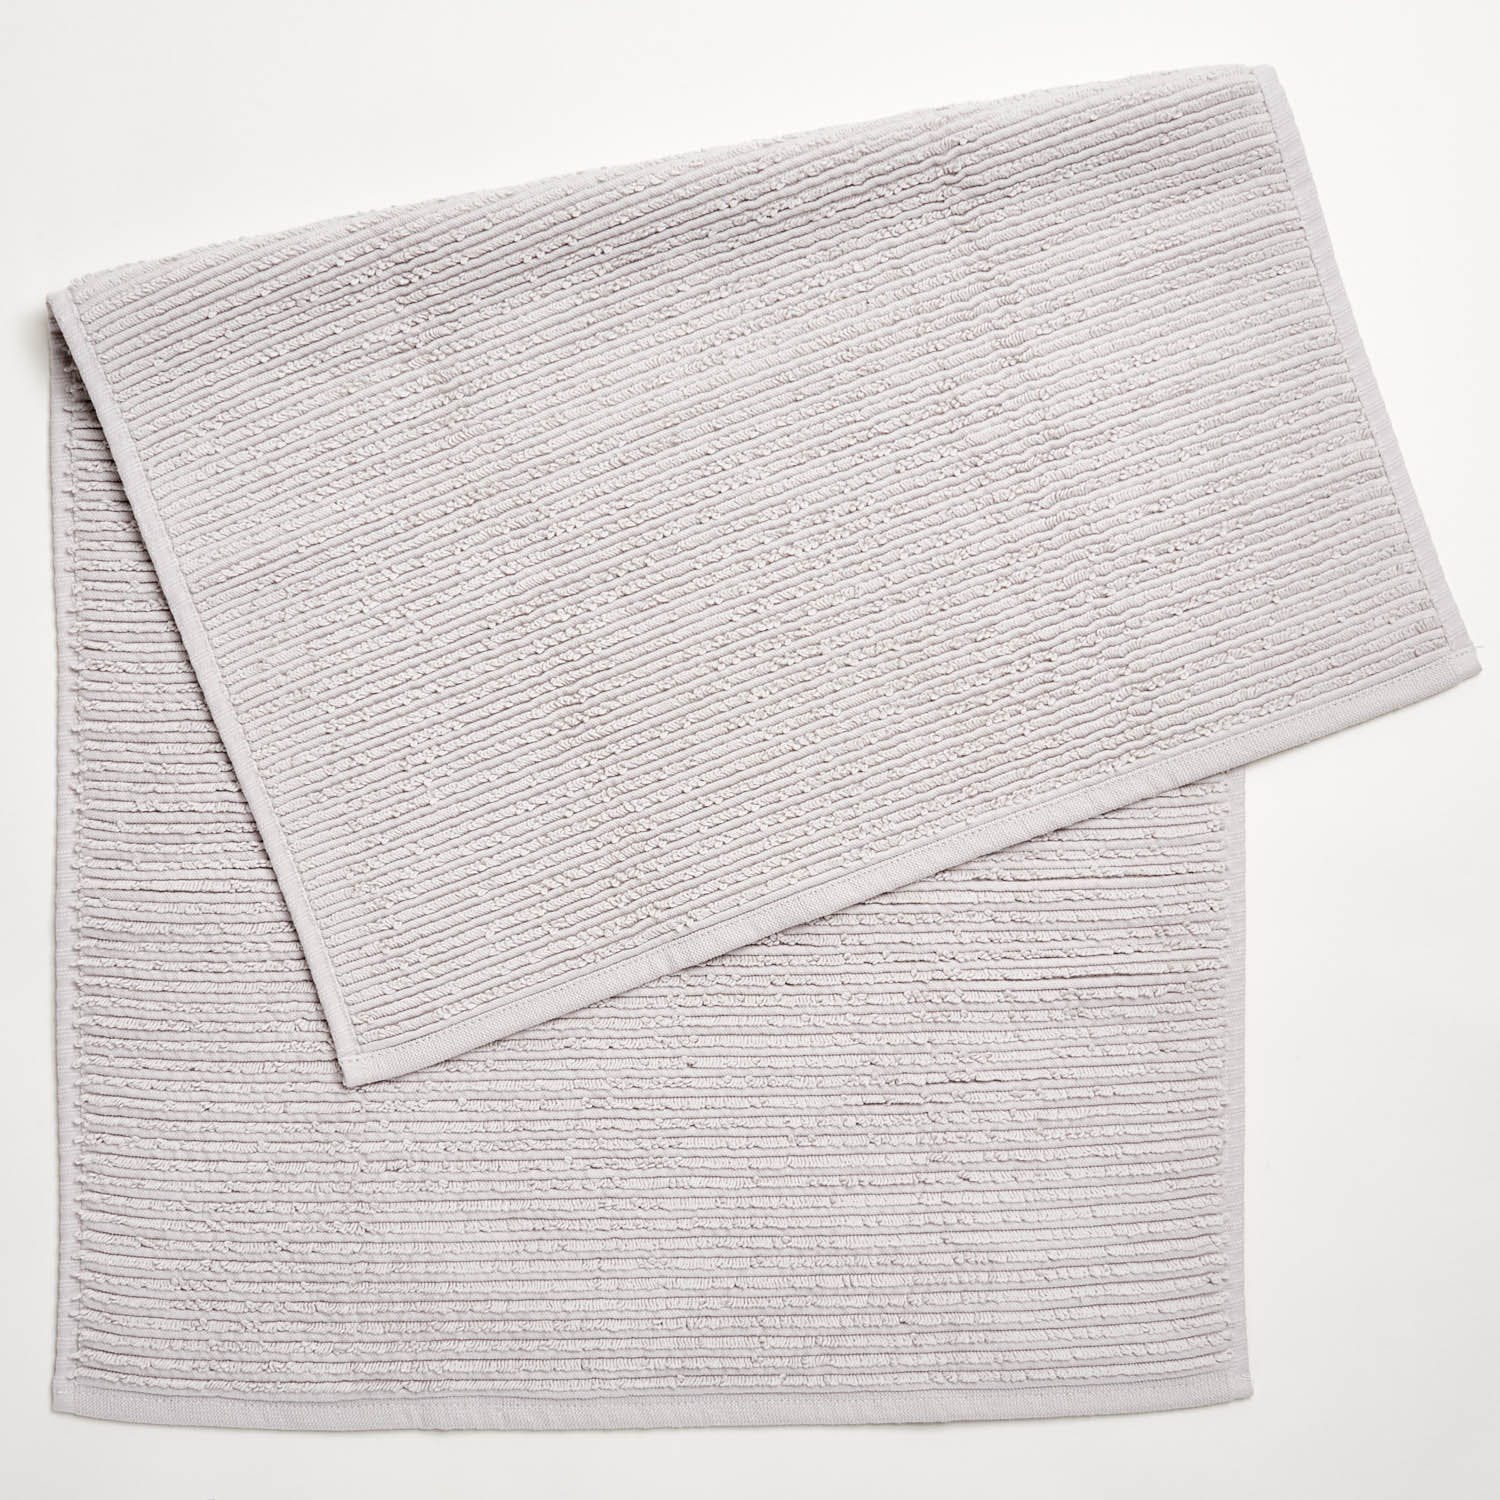 Folded textured towel with ribbing pattern on white background.